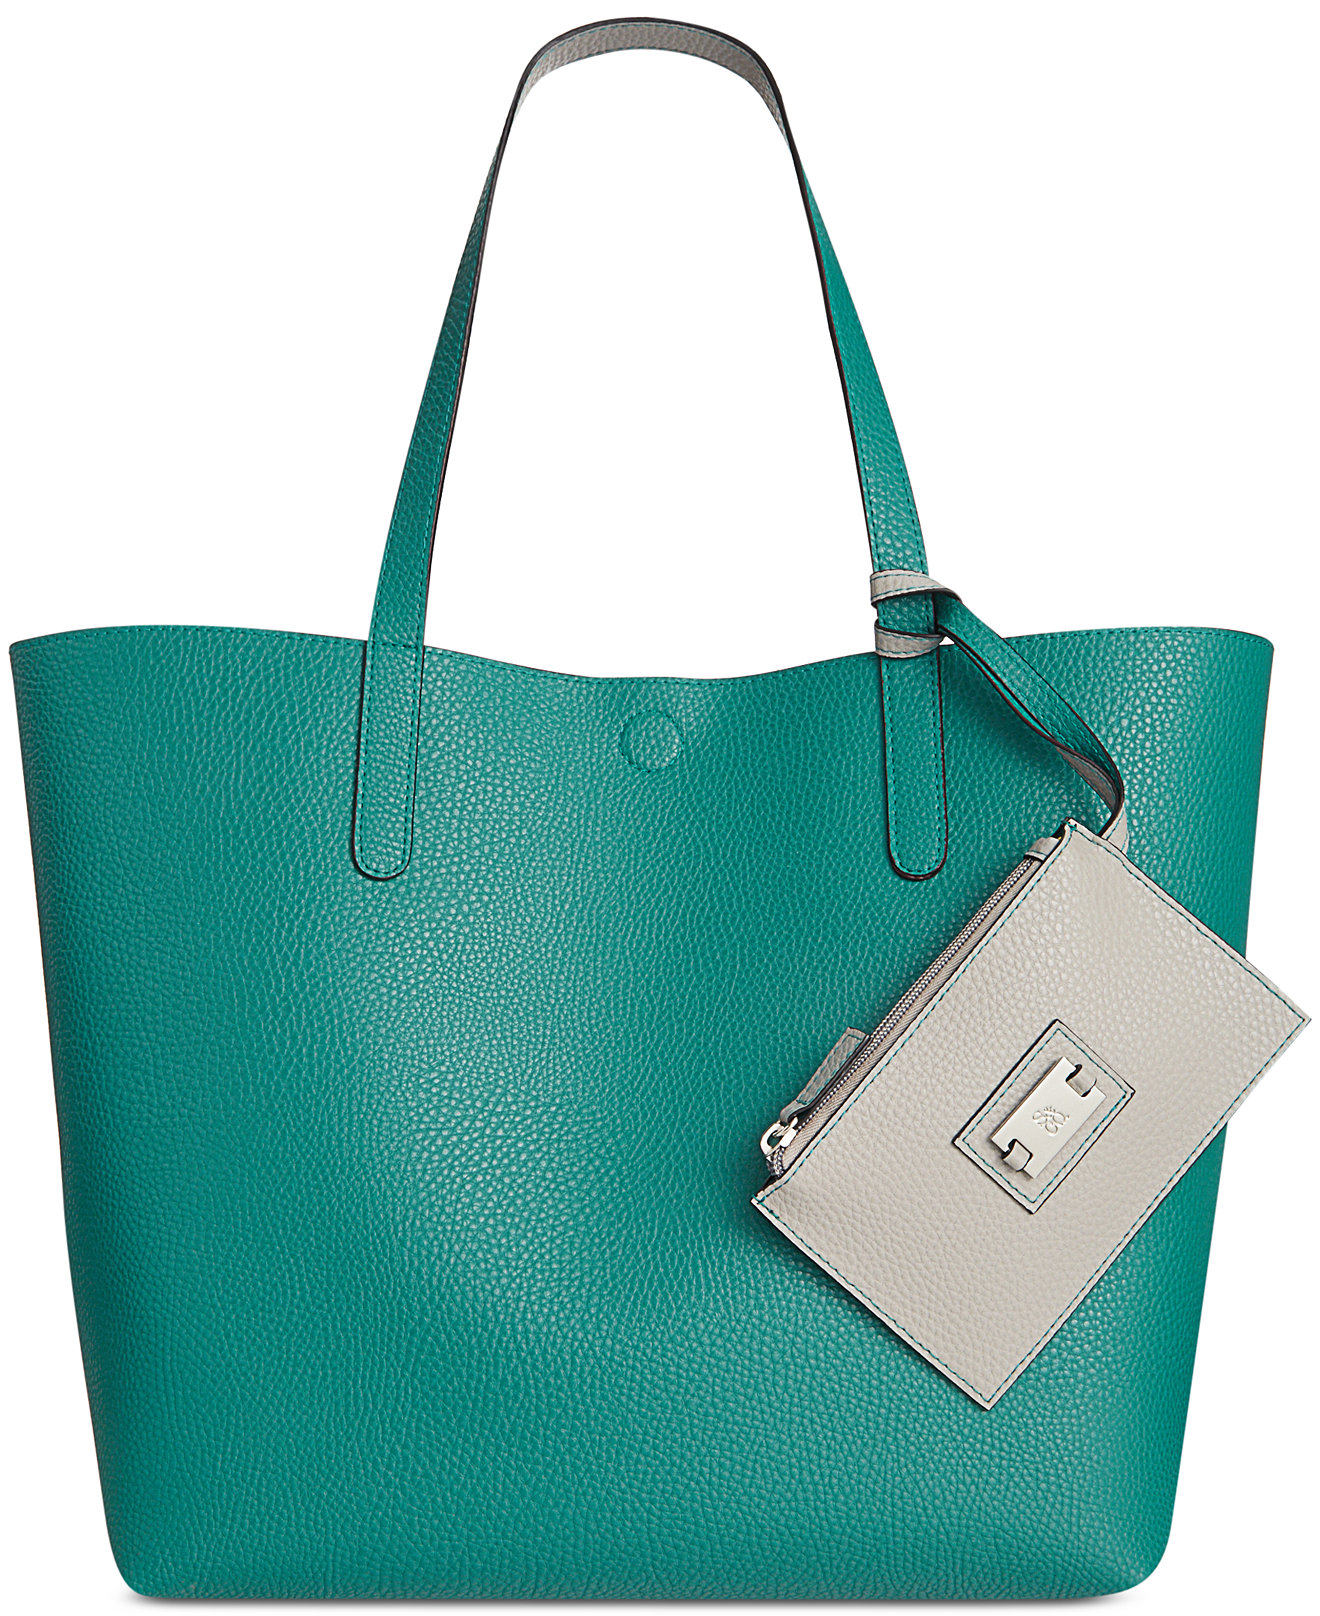 Clean Cut Reversible Tote with Wristlet